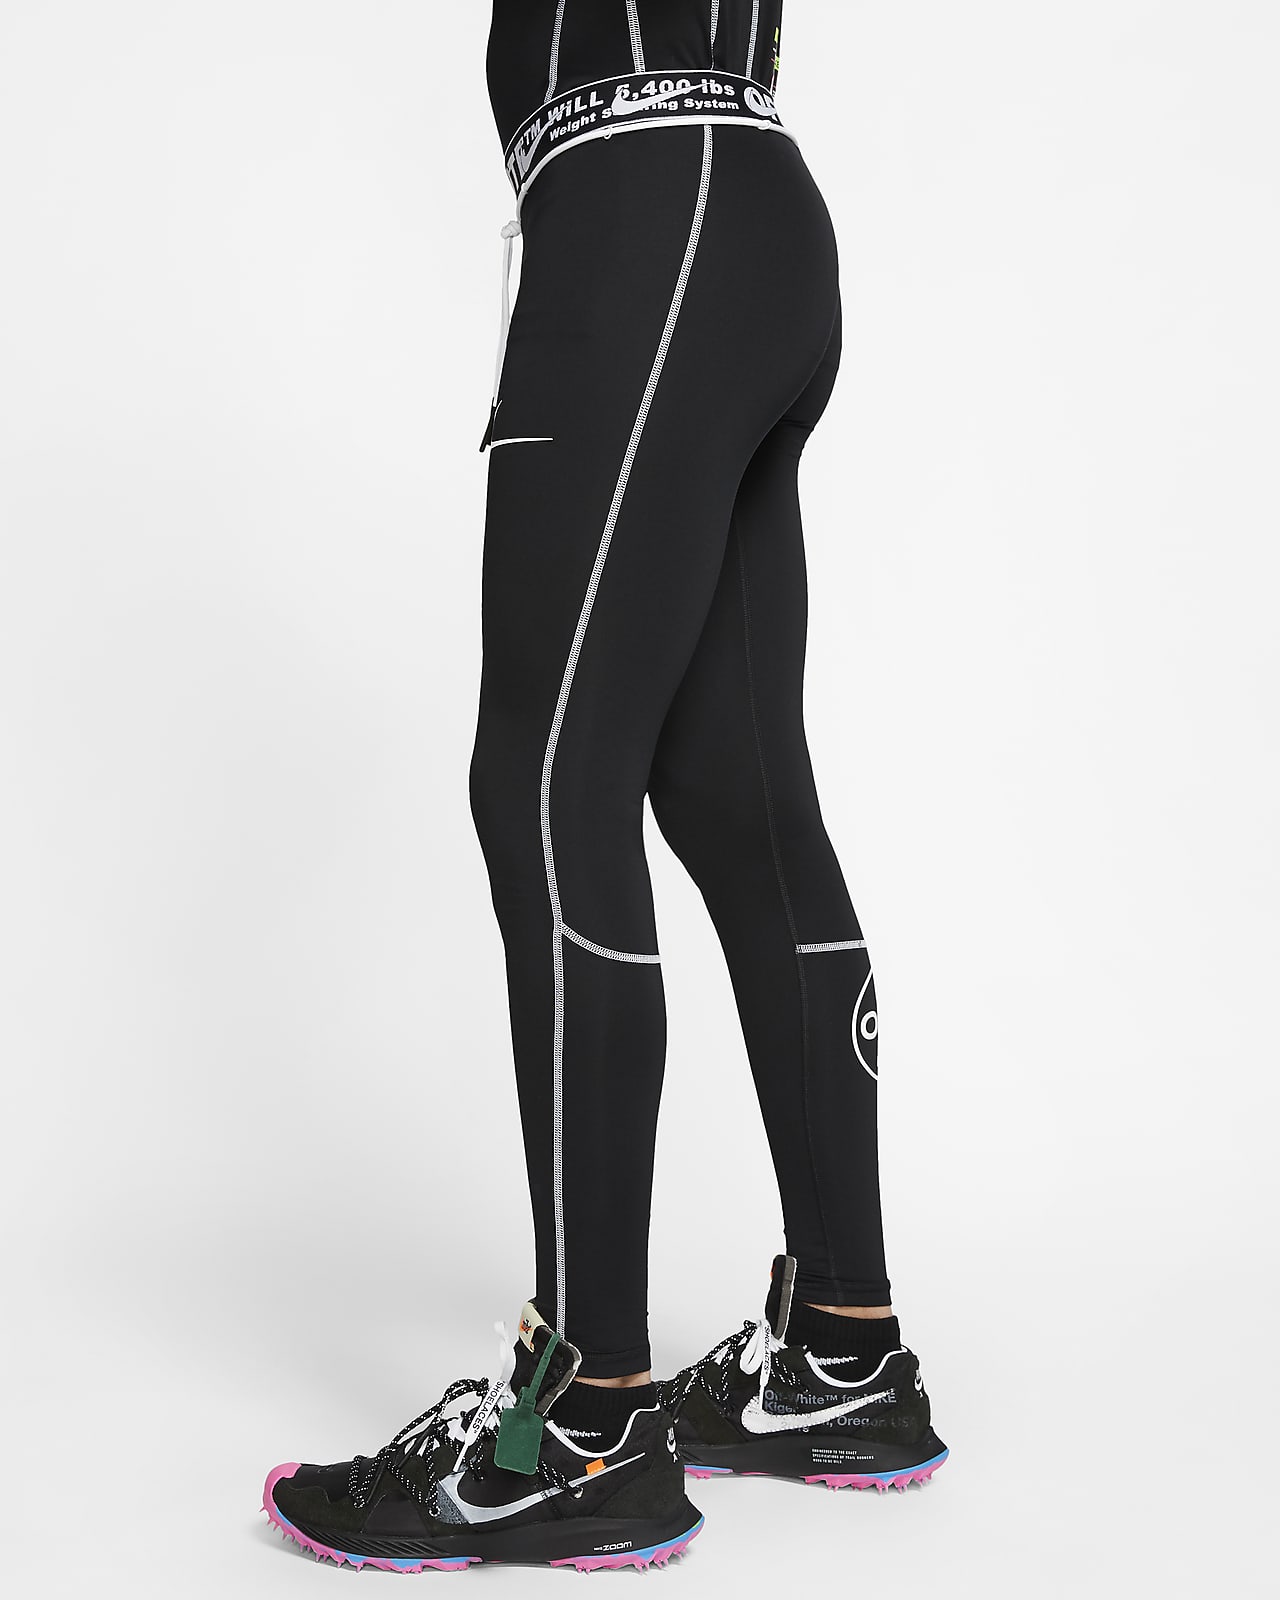 white and gold nike tights